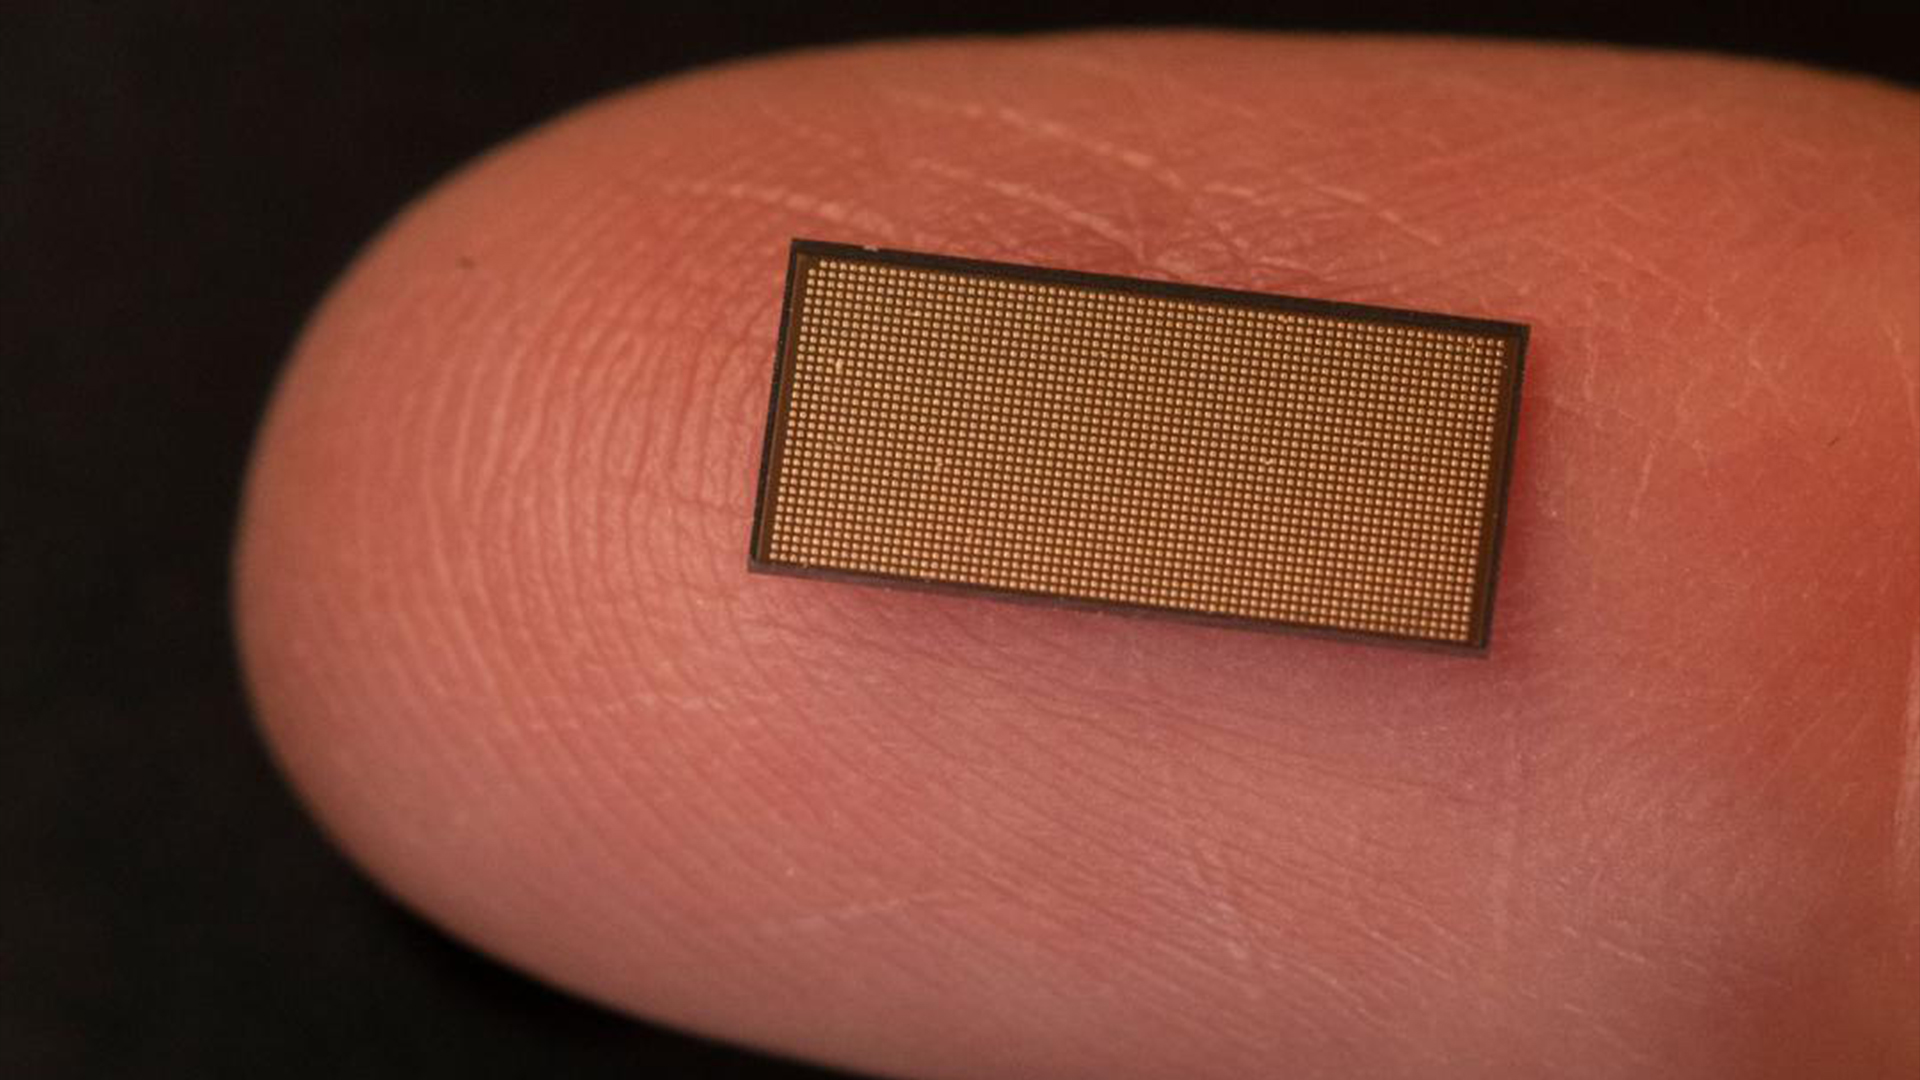 Intel's Lohi 2 Neuromorphic chip on a fingertip.